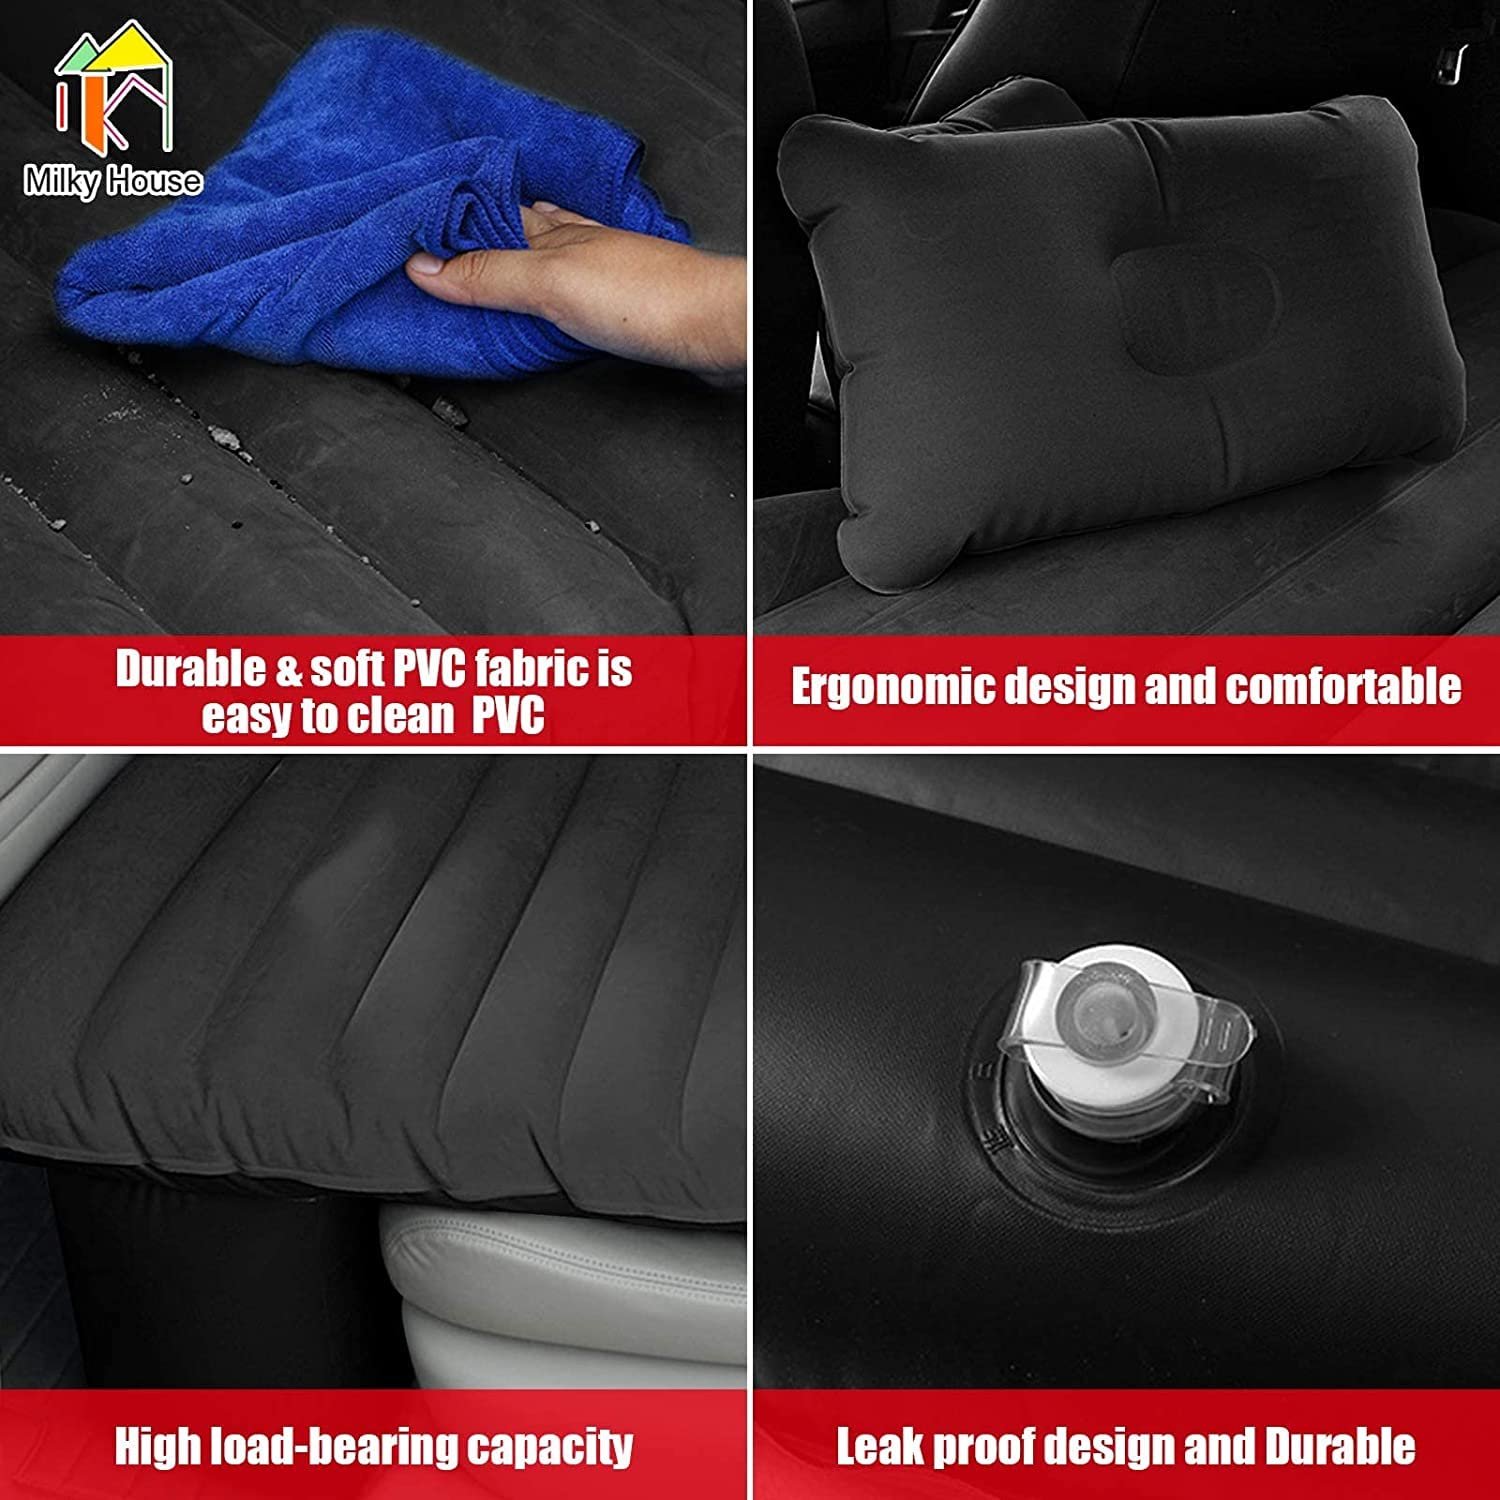 Car Bed Mattress Universal Car Back Seat Travel Air Inflation with Two Pillows, Air Pump and Repair Kit (Black)